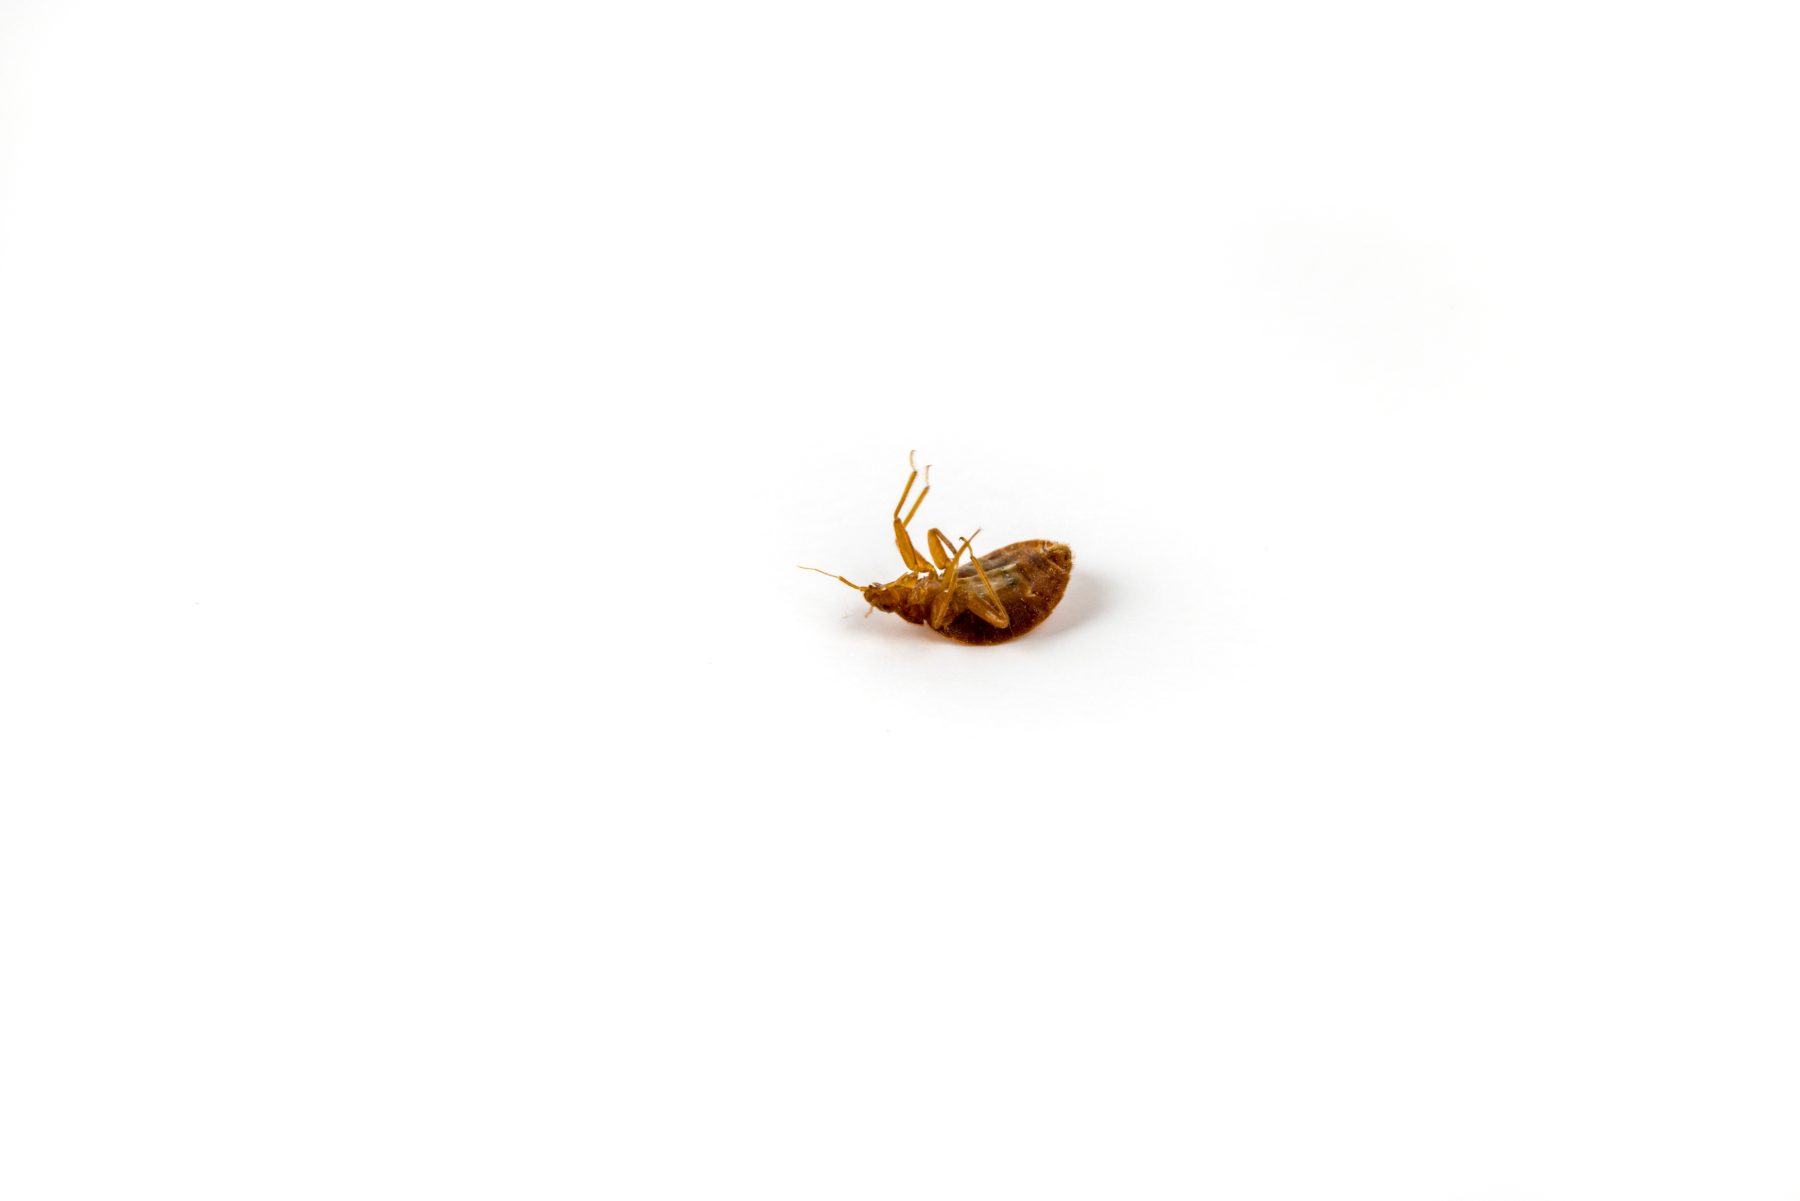 Bed bug upside down still and quiet isolated on white surface